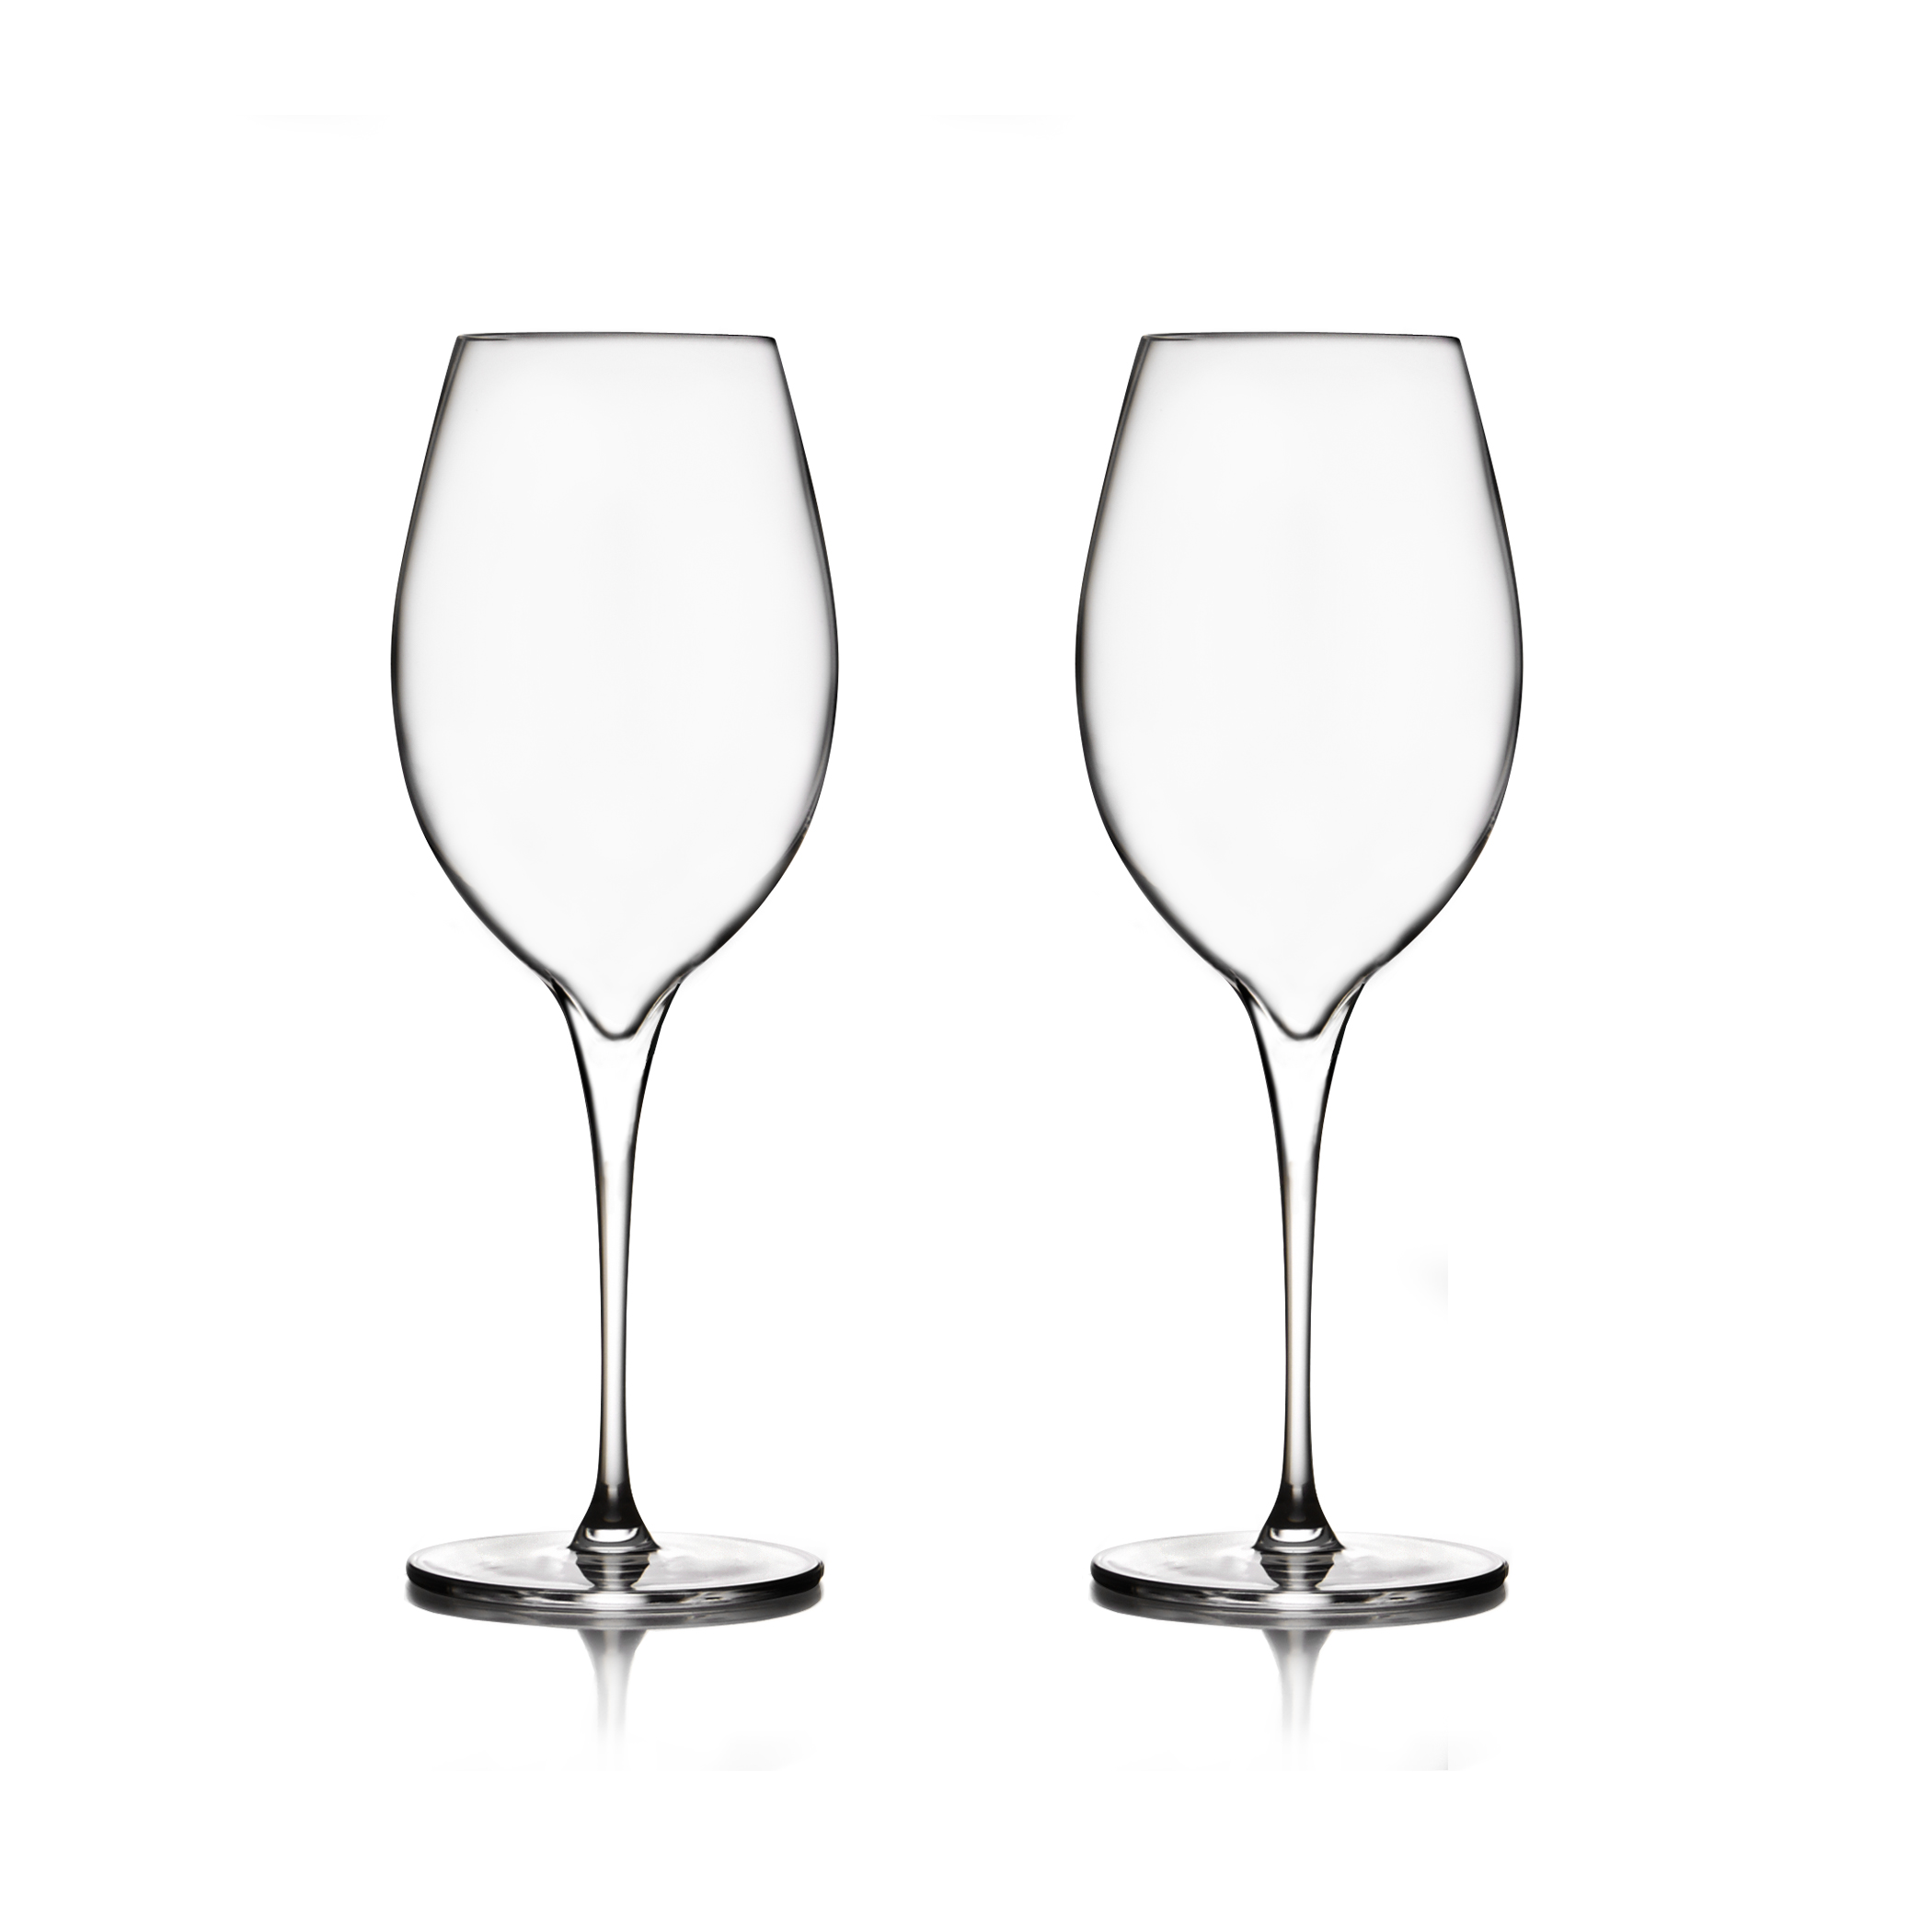 tilskuer Mere end noget andet Medic Vie Pinot Grigio Glasses (Set of 2) by Neil Cohen | Nambe